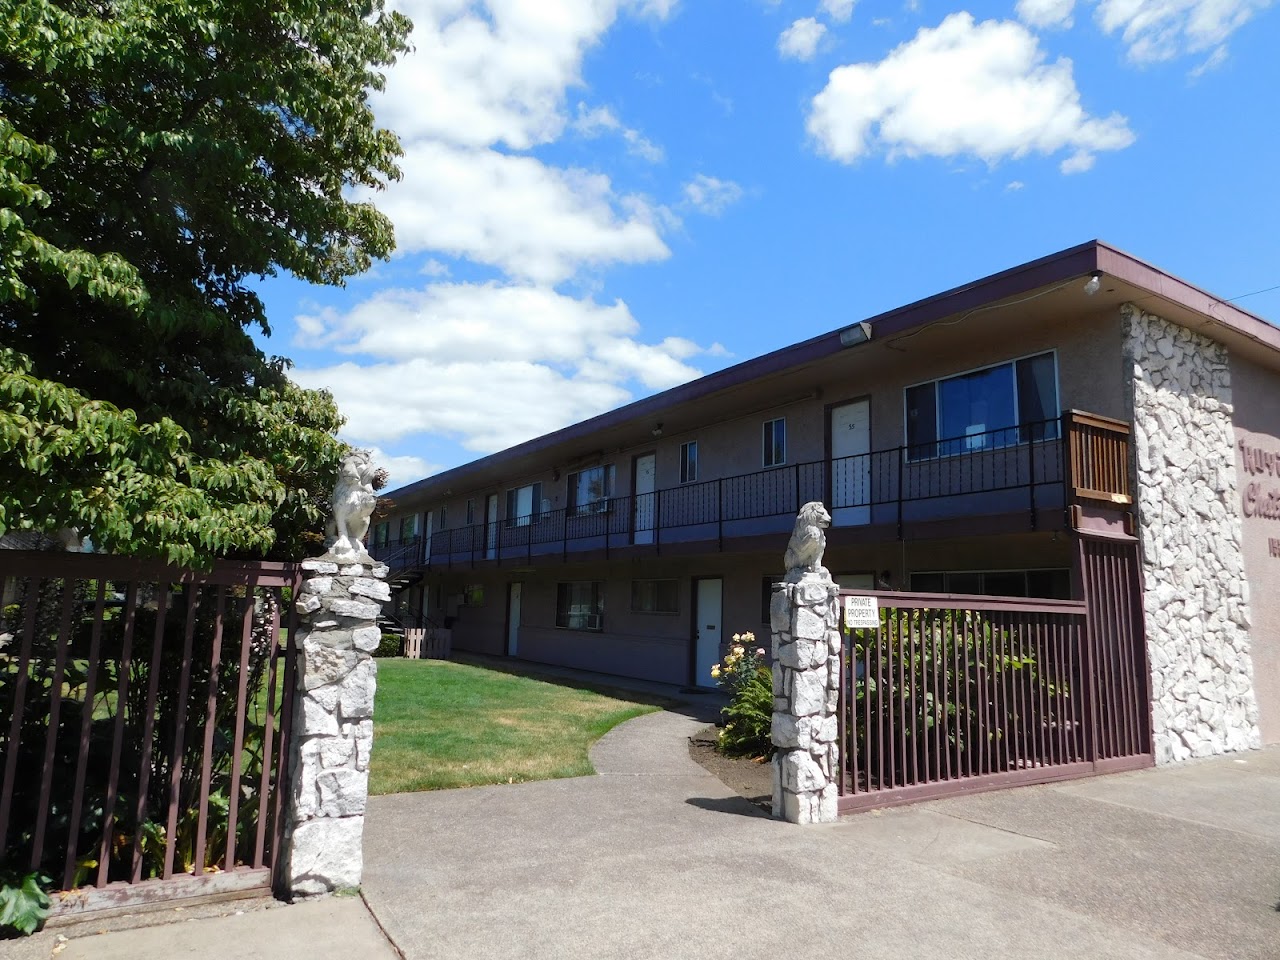 Photo of ROYAL BUILDING. Affordable housing located at 509 MAIN ST SPRINGFIELD, OR 97477